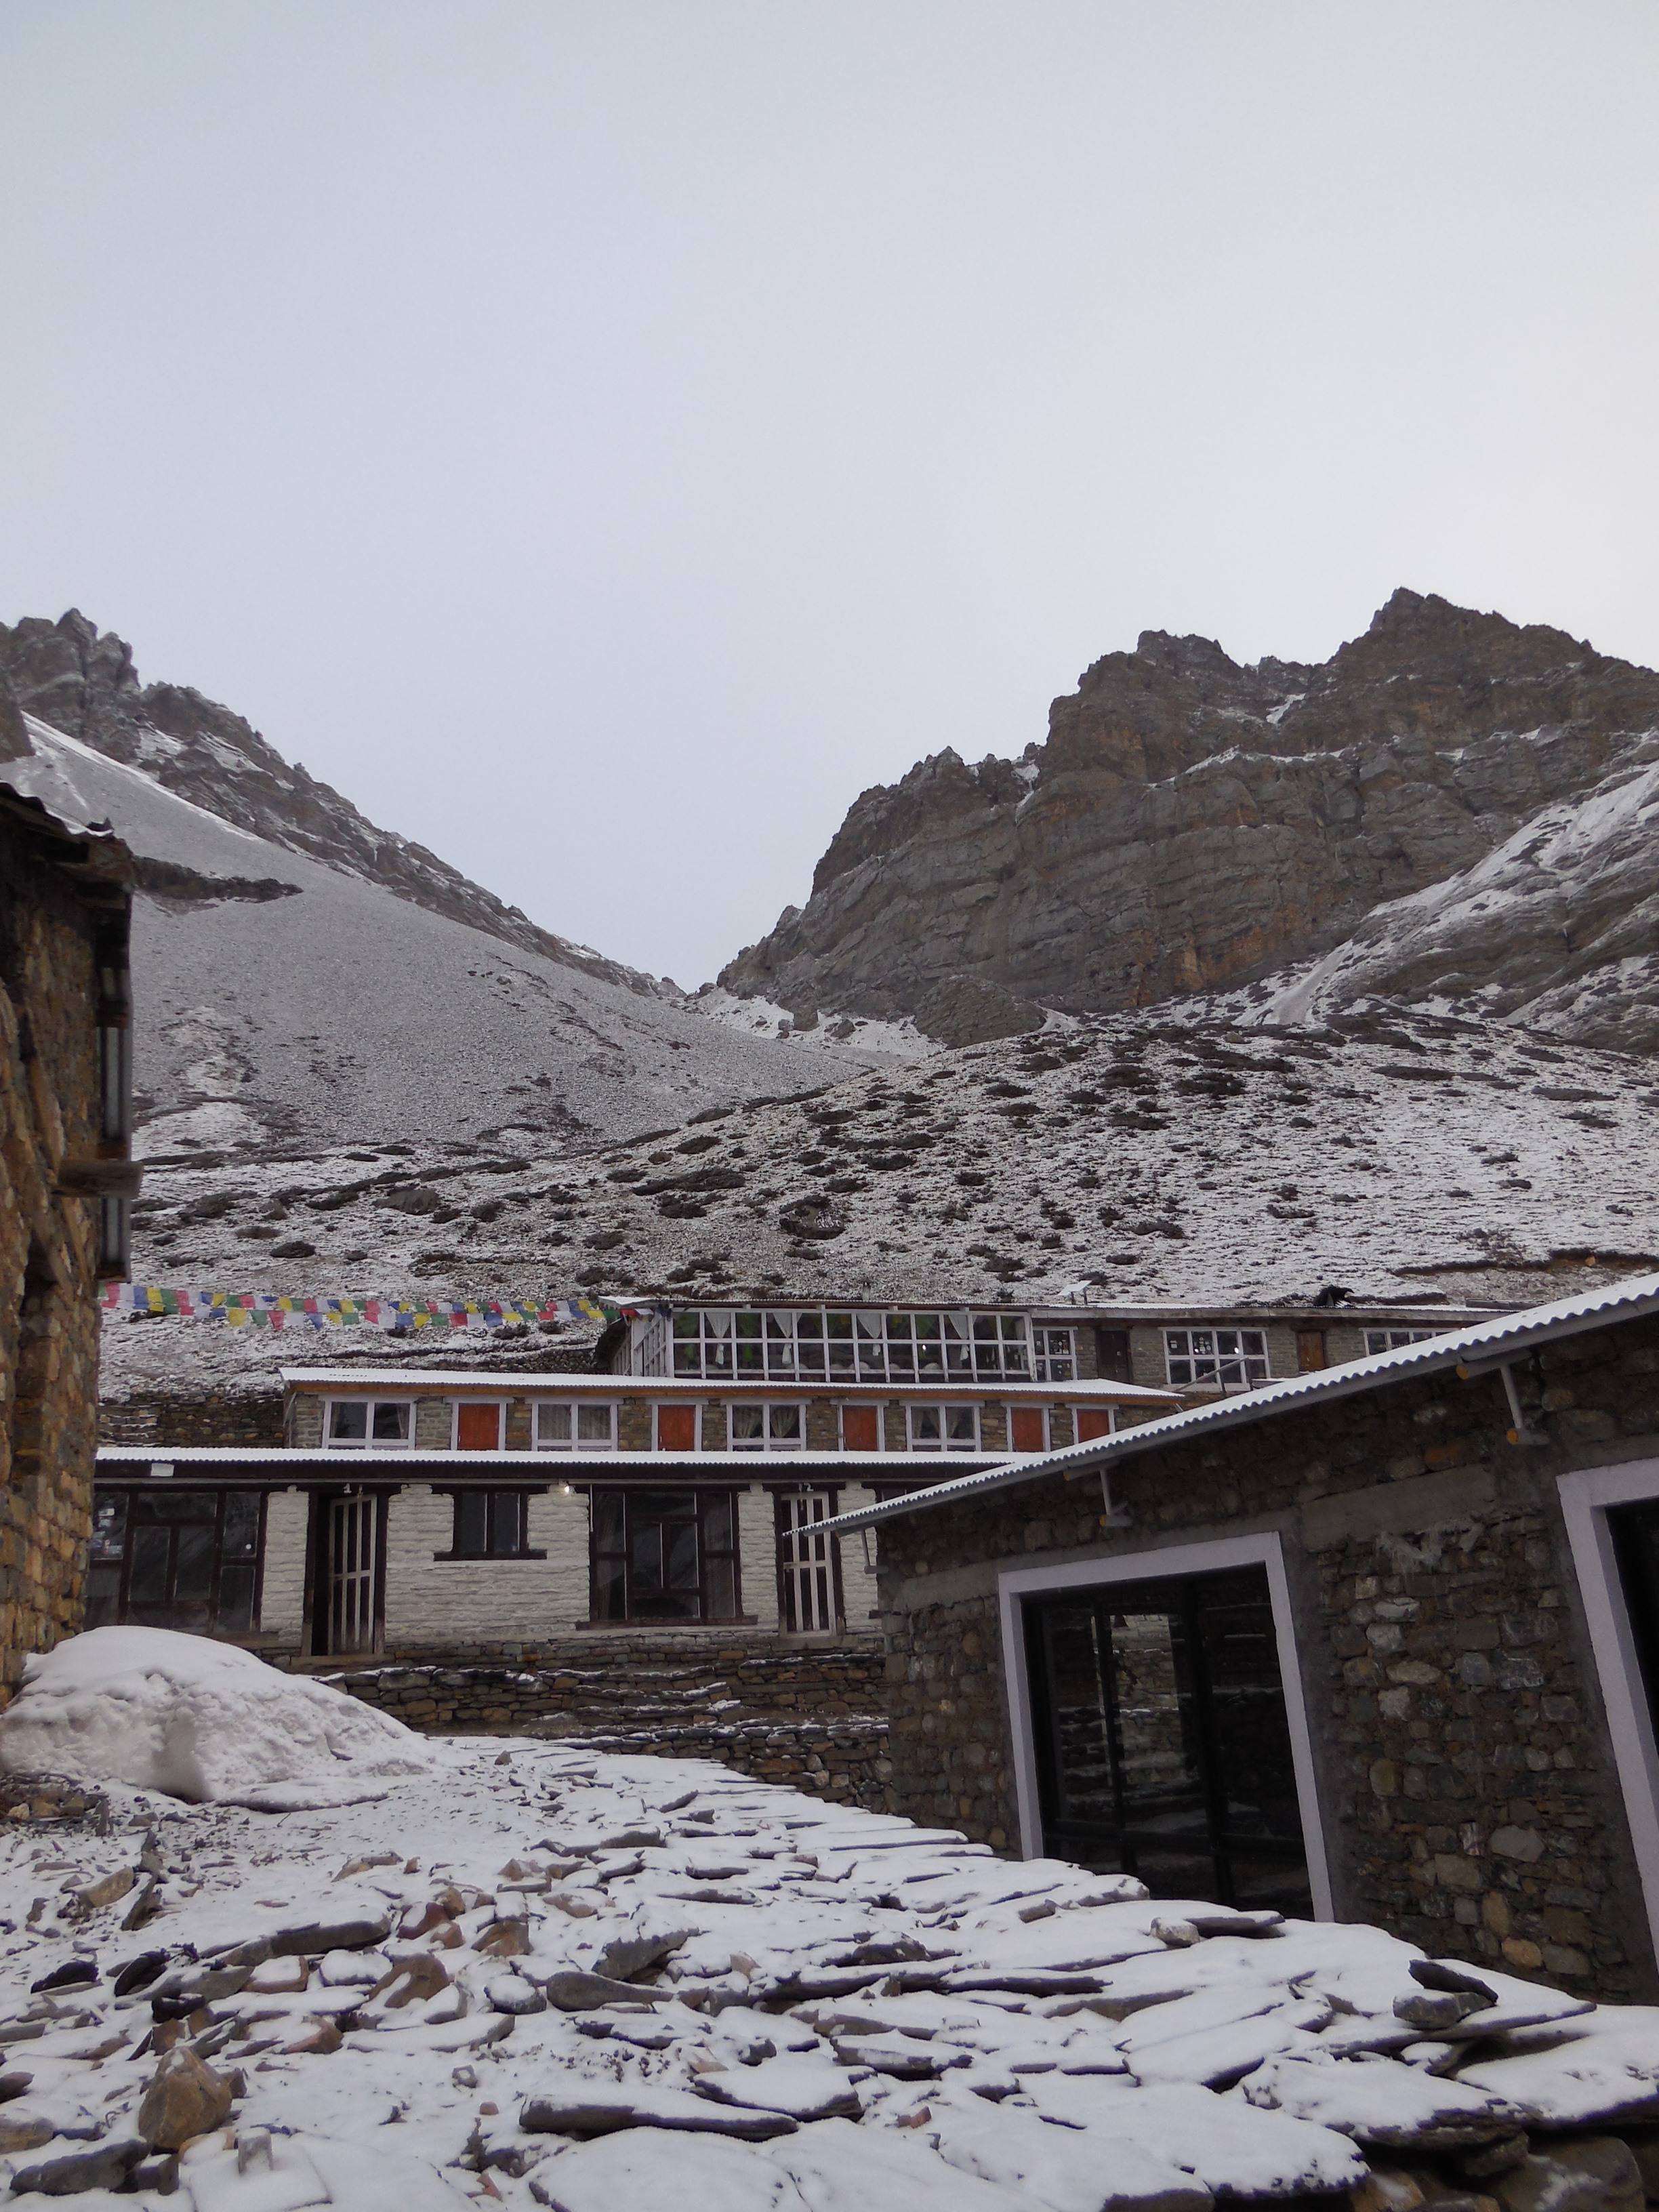 Hello, snow. I missed you so much! The high camp is a bit more up, but it is also possible to stay in this lodge in Thorung Phedi and leave early in the morning to go up to Thorung La (5418m) and reach Muktinath on the other side still on the same day